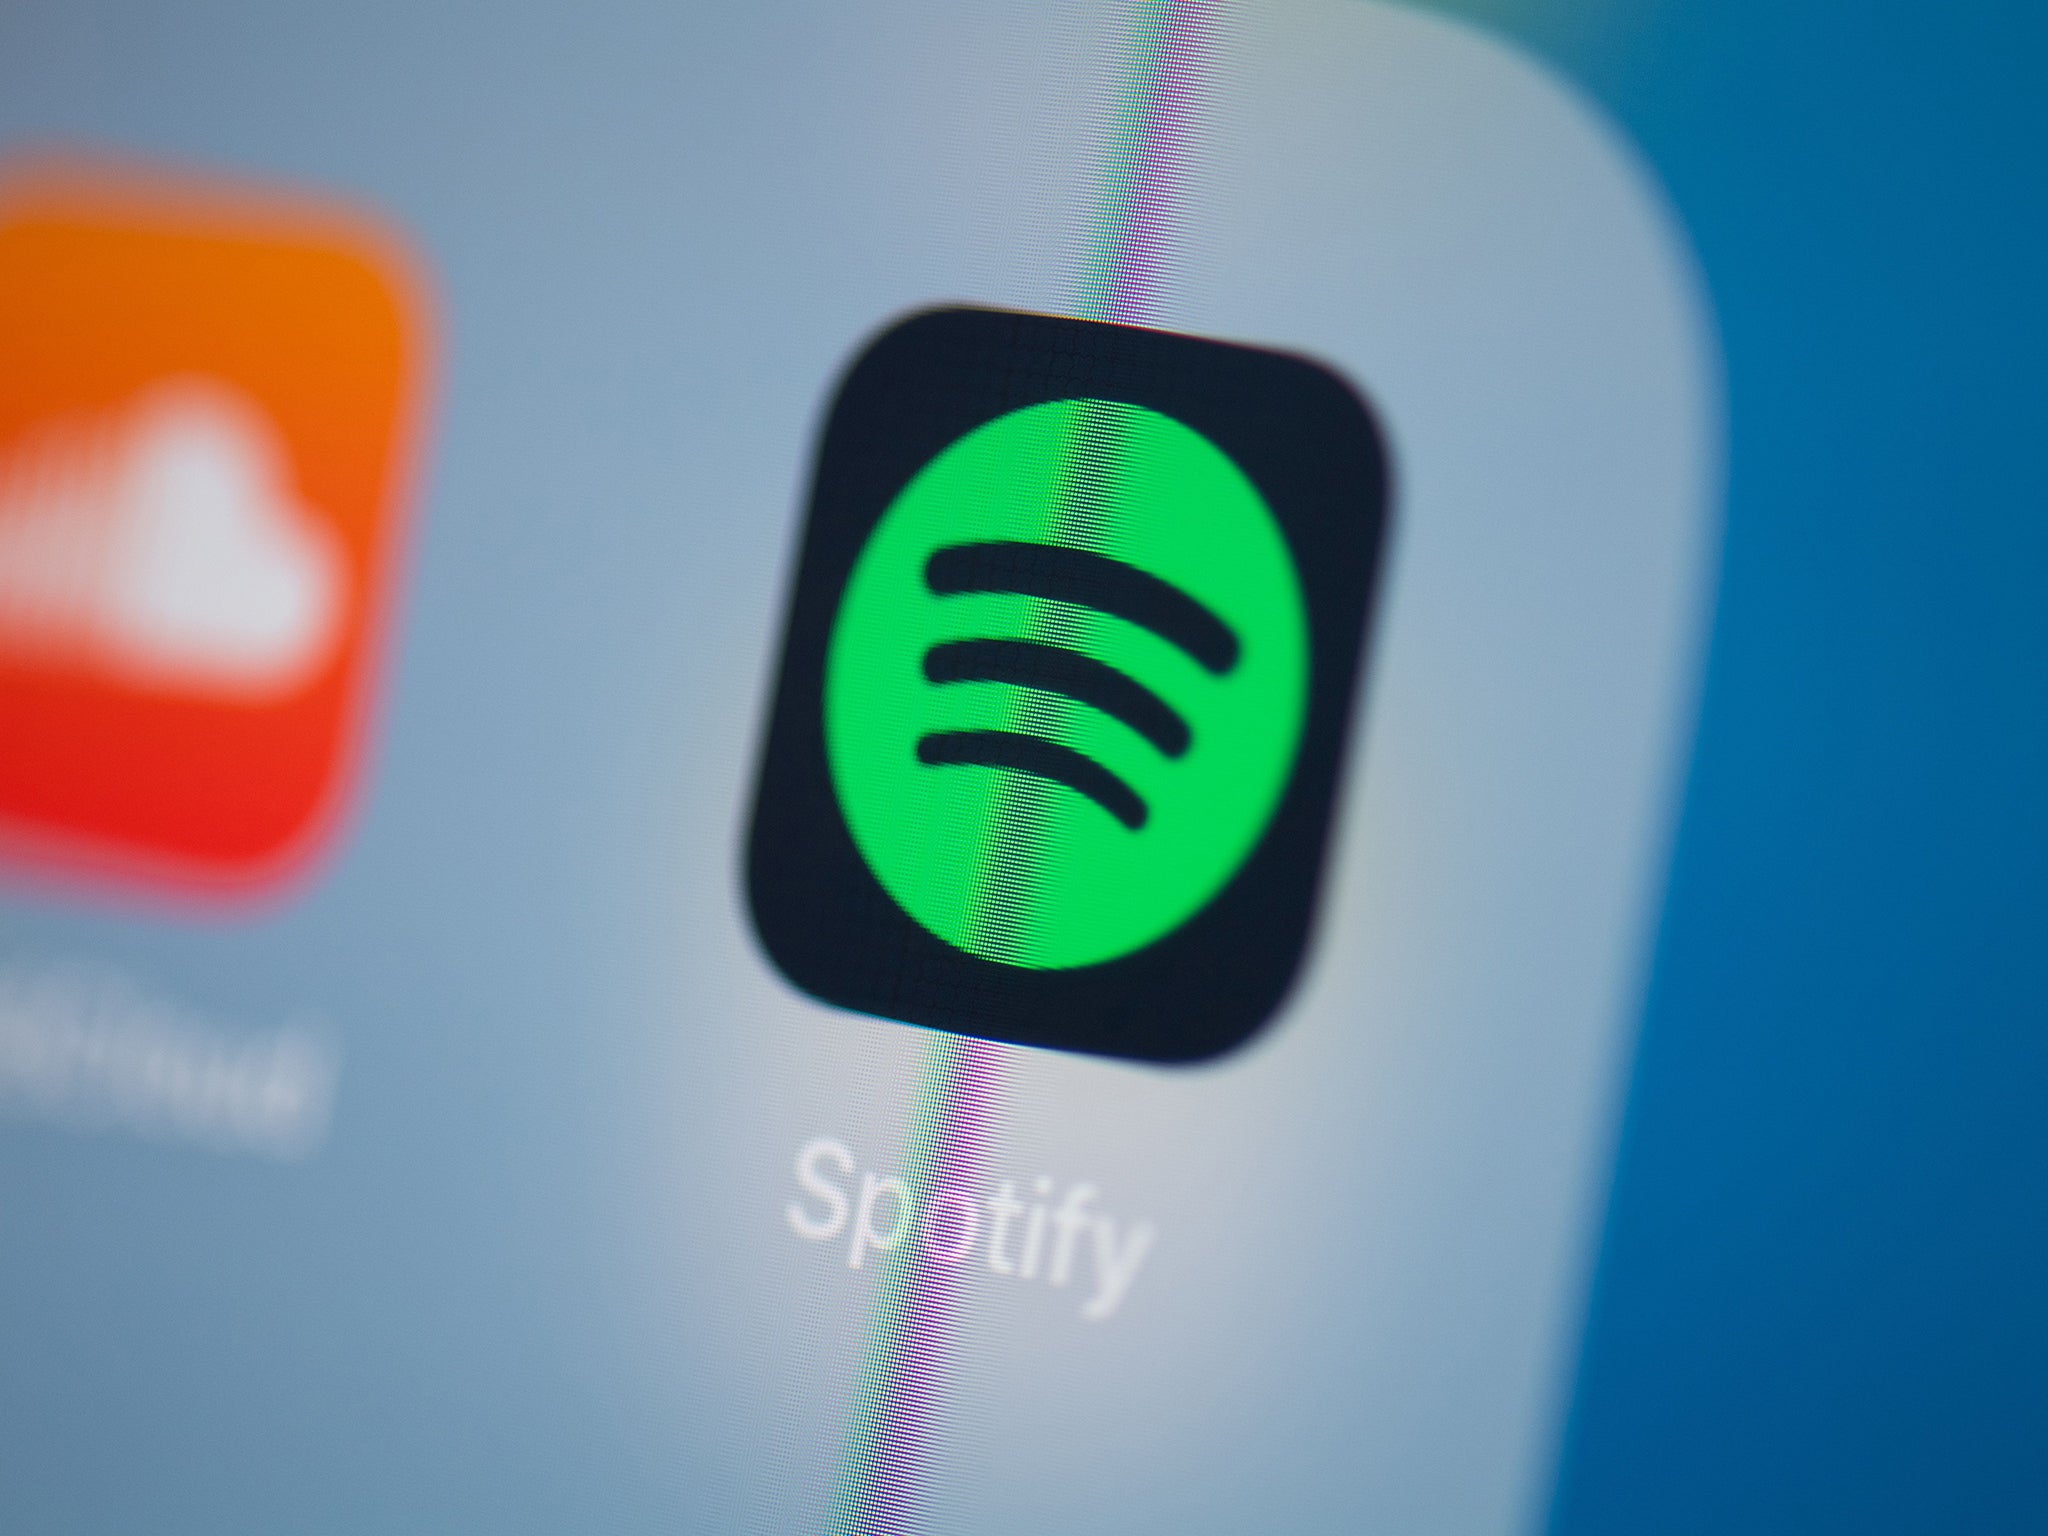 Spotify is a streaming giant, with over 300 million users